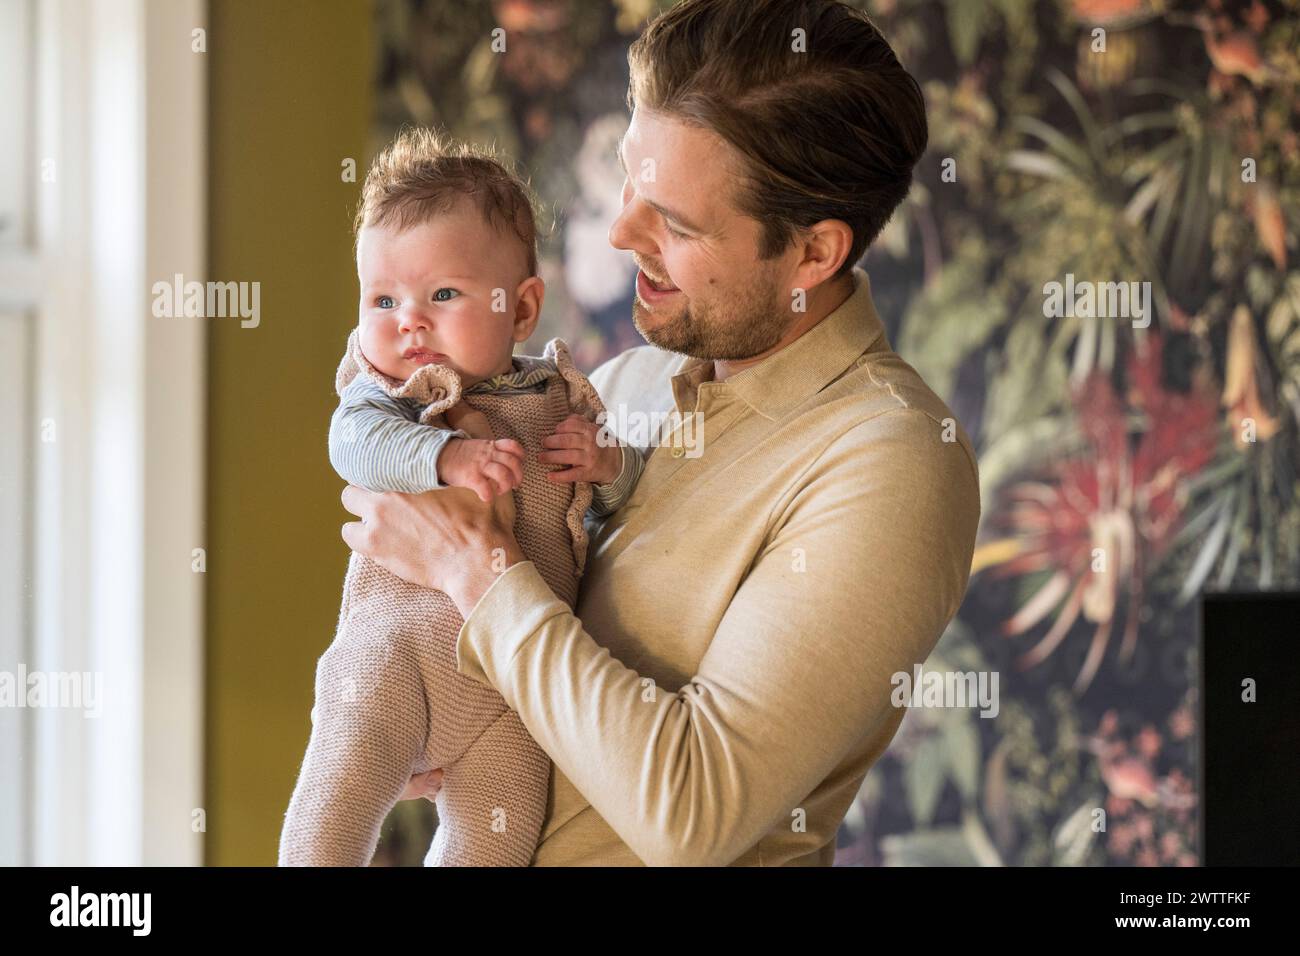 A heartwarming moment as a father holds his baby at home. Stock Photo